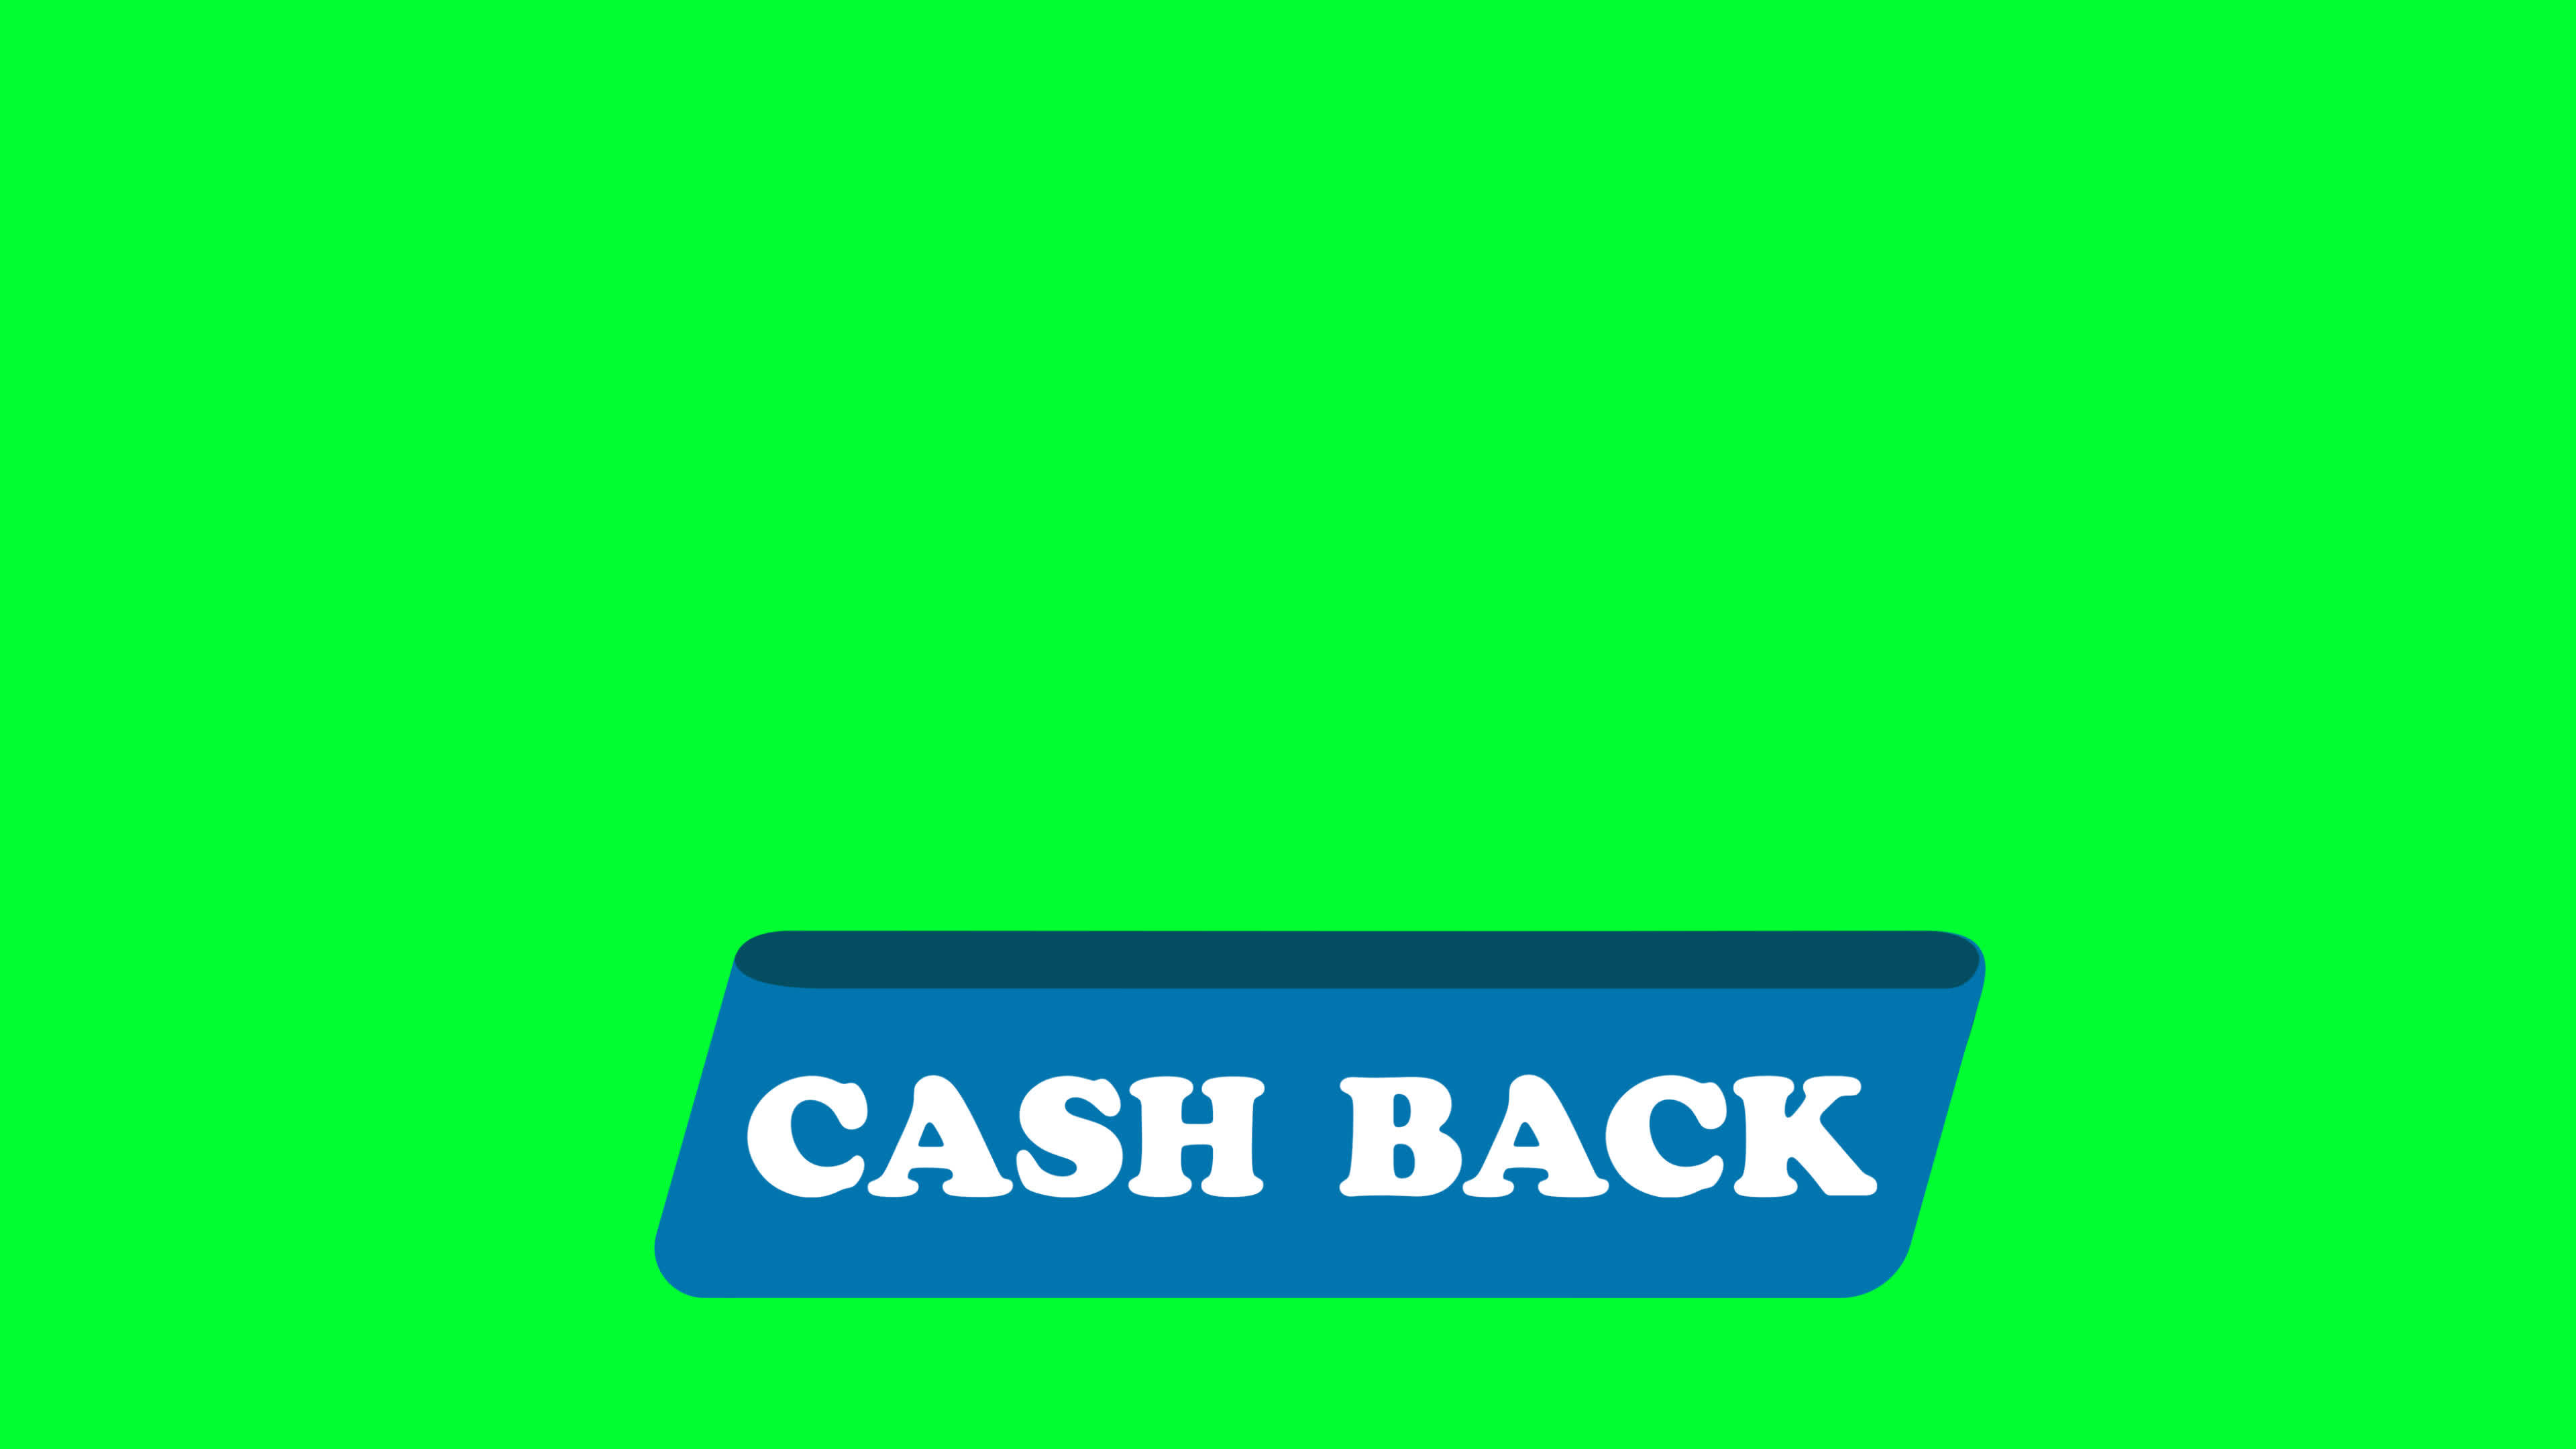 cashback-bonus-and-refund-for-digital-payment-on-green-screen-animated